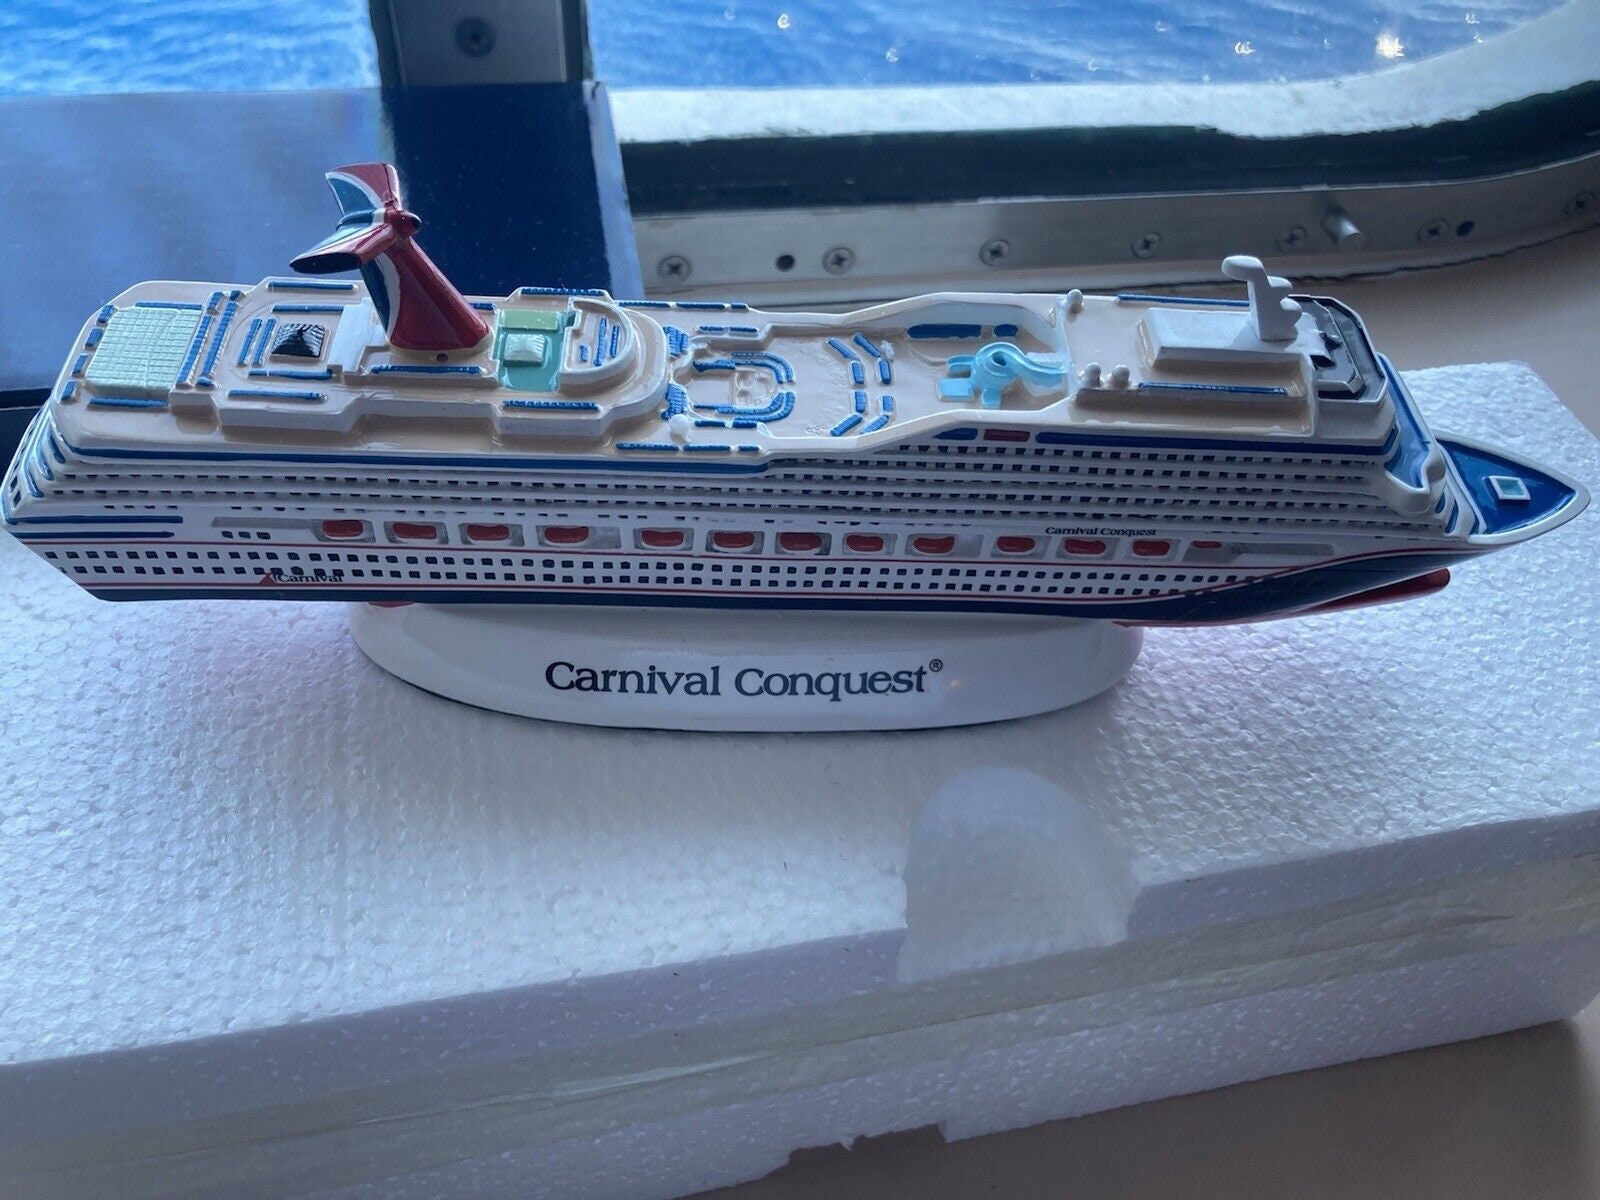 Carnival Cruise Barbie 1997 Special Edition 15186 Vacation Nautical Ship  Vtg HTF